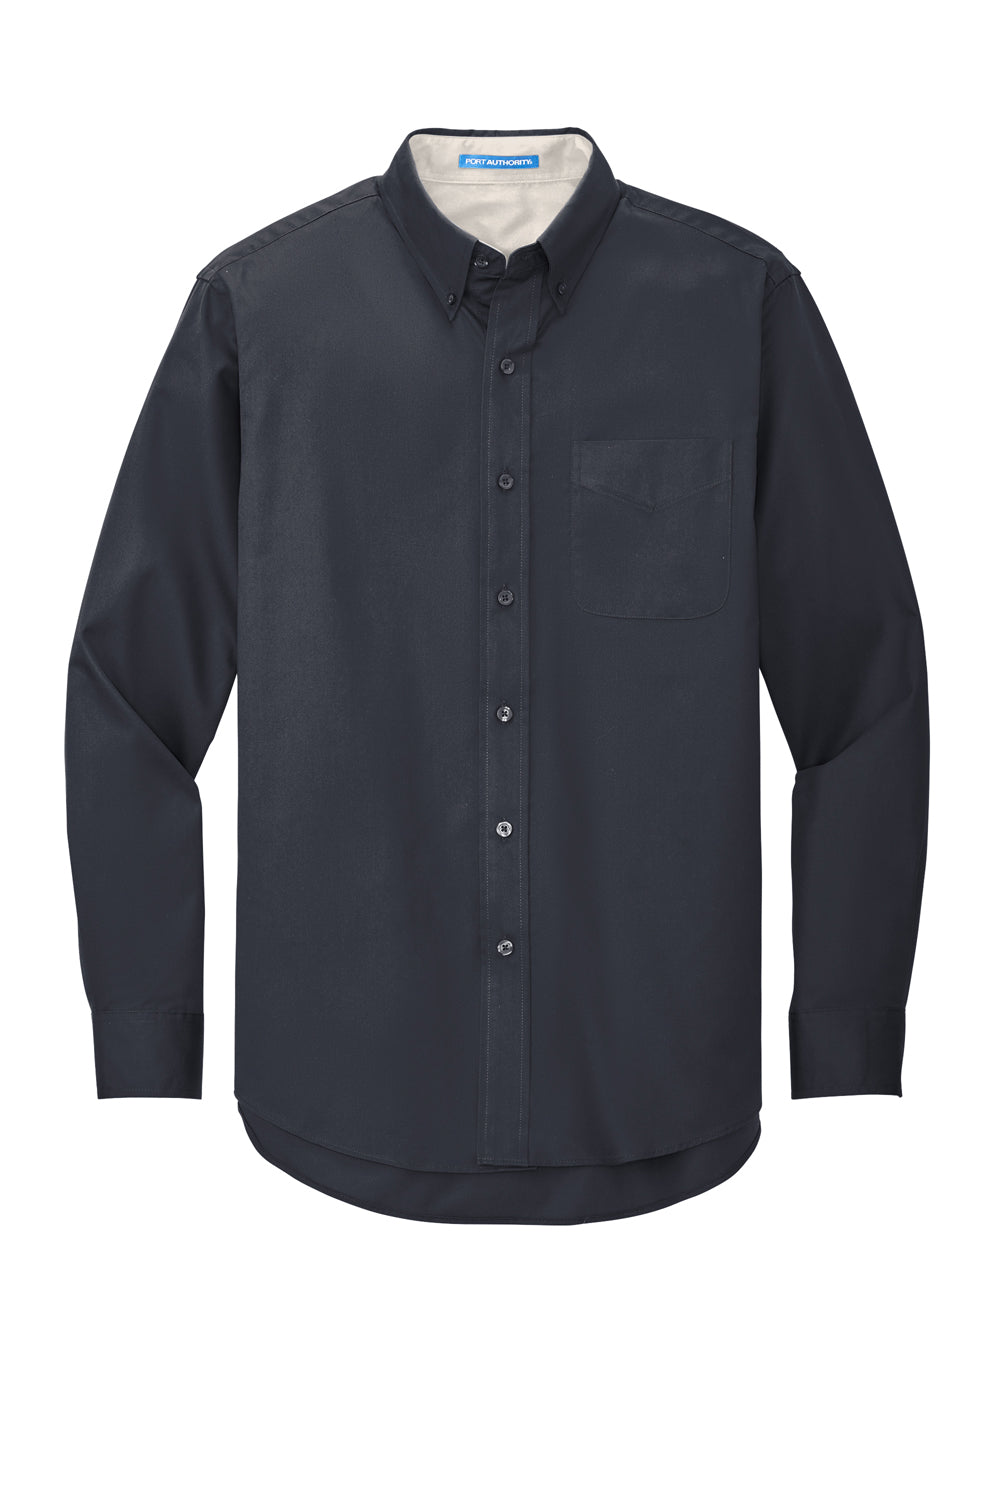 Port Authority S608/TLS608/S608ES Mens Easy Care Wrinkle Resistant Long Sleeve Button Down Shirt w/ Pocket Classic Navy Blue Flat Front